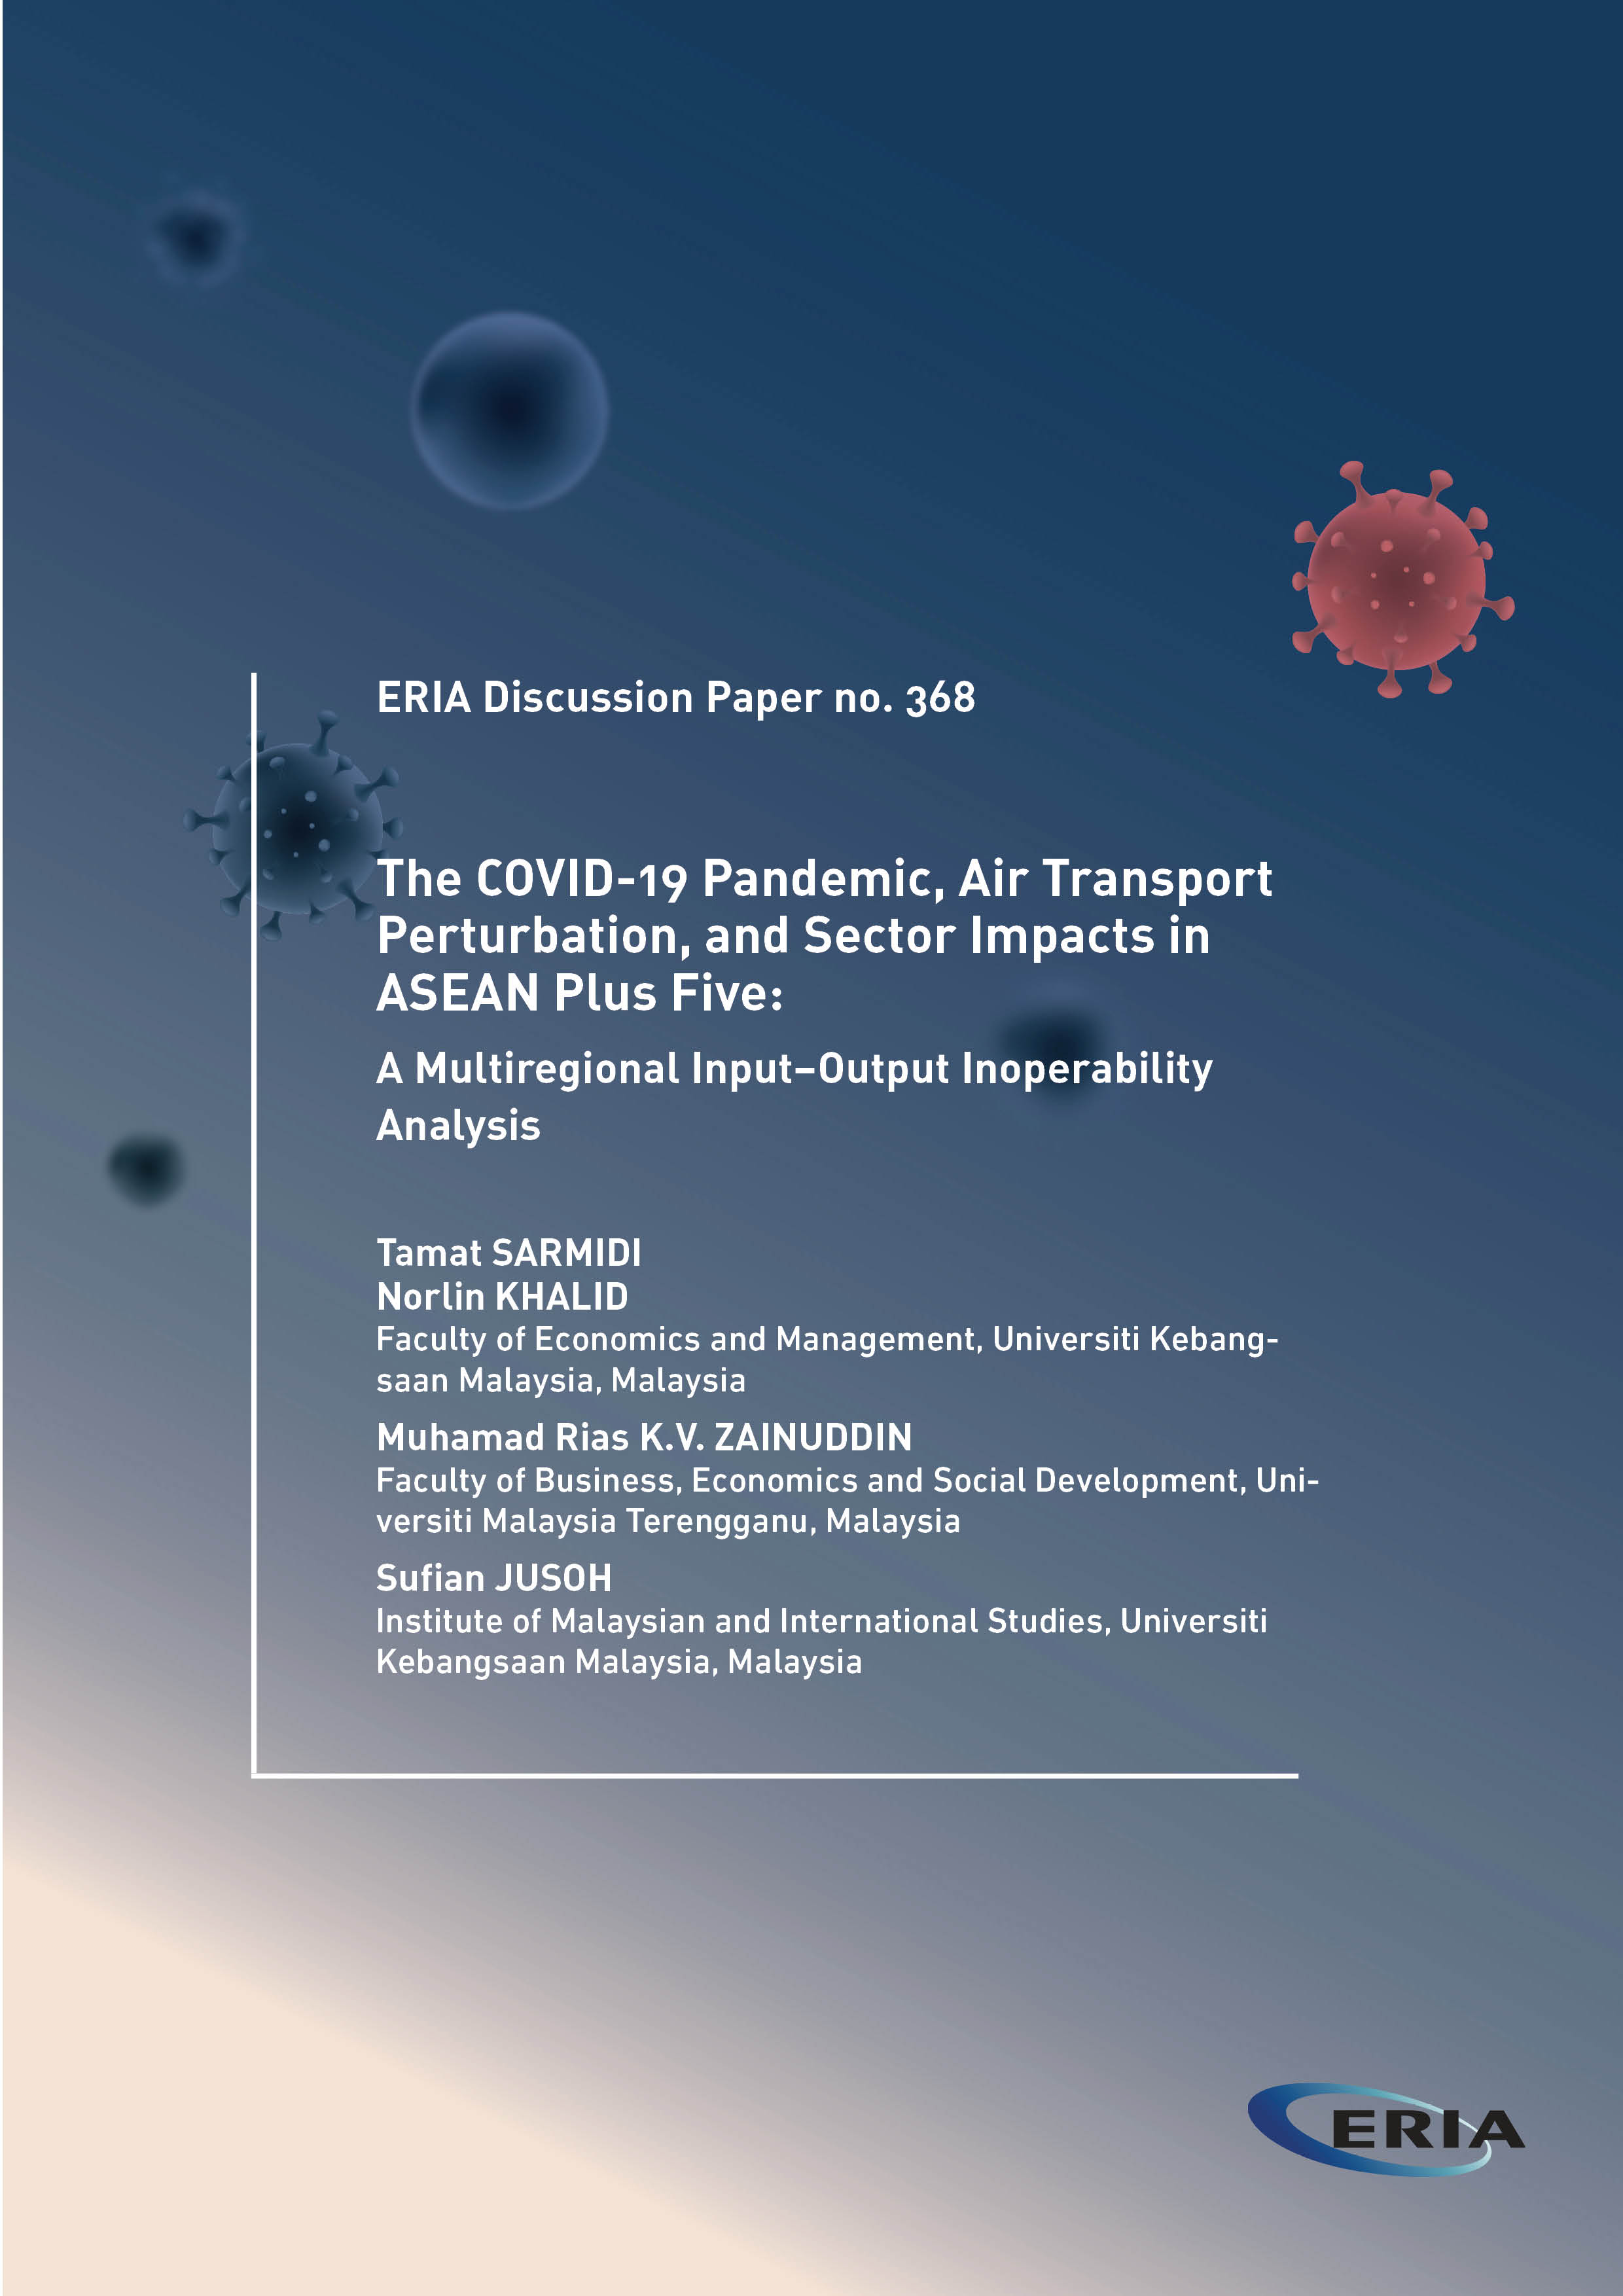 The COVID-19 Pandemic, Air Transport Perturbation, and Sector Impacts in ASEAN Plus Five:  A Multiregional Input-Output Inoperability Analysis